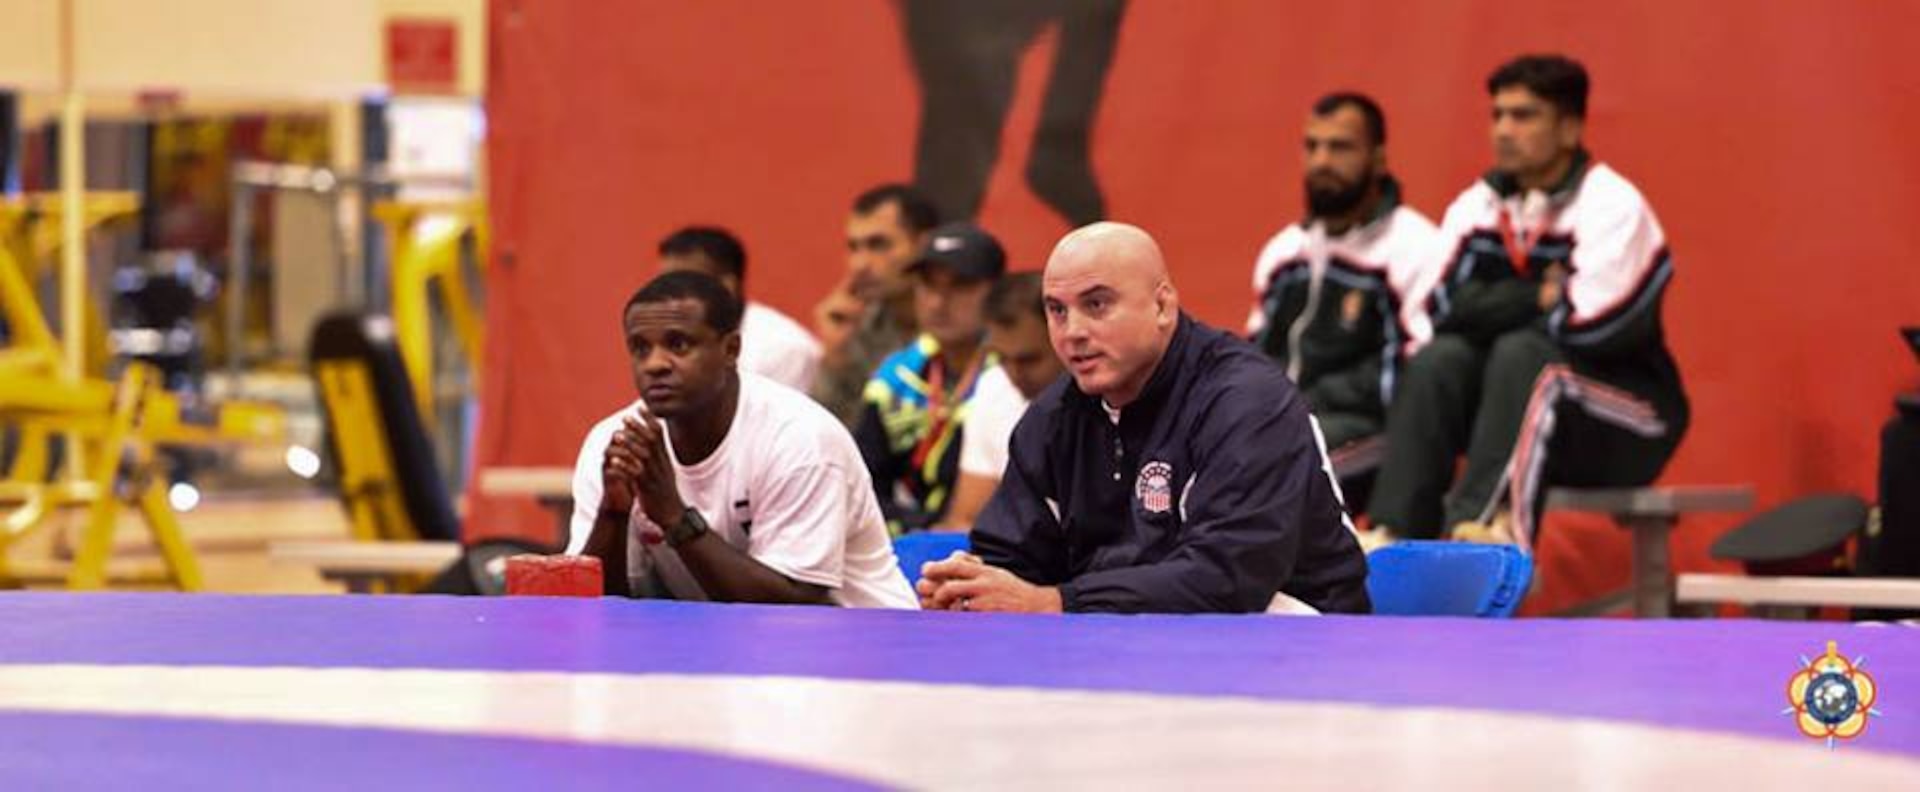 Assist Coach Gunnery Sgt. James Shillow (left) and Mr. Jason Loukides watch during the Greco-Roman competition at the 29th CISM World Military Wrestling Championship at Joint Base McGuire-Dix-Lakehurst, New Jersey 1-8 October 2014